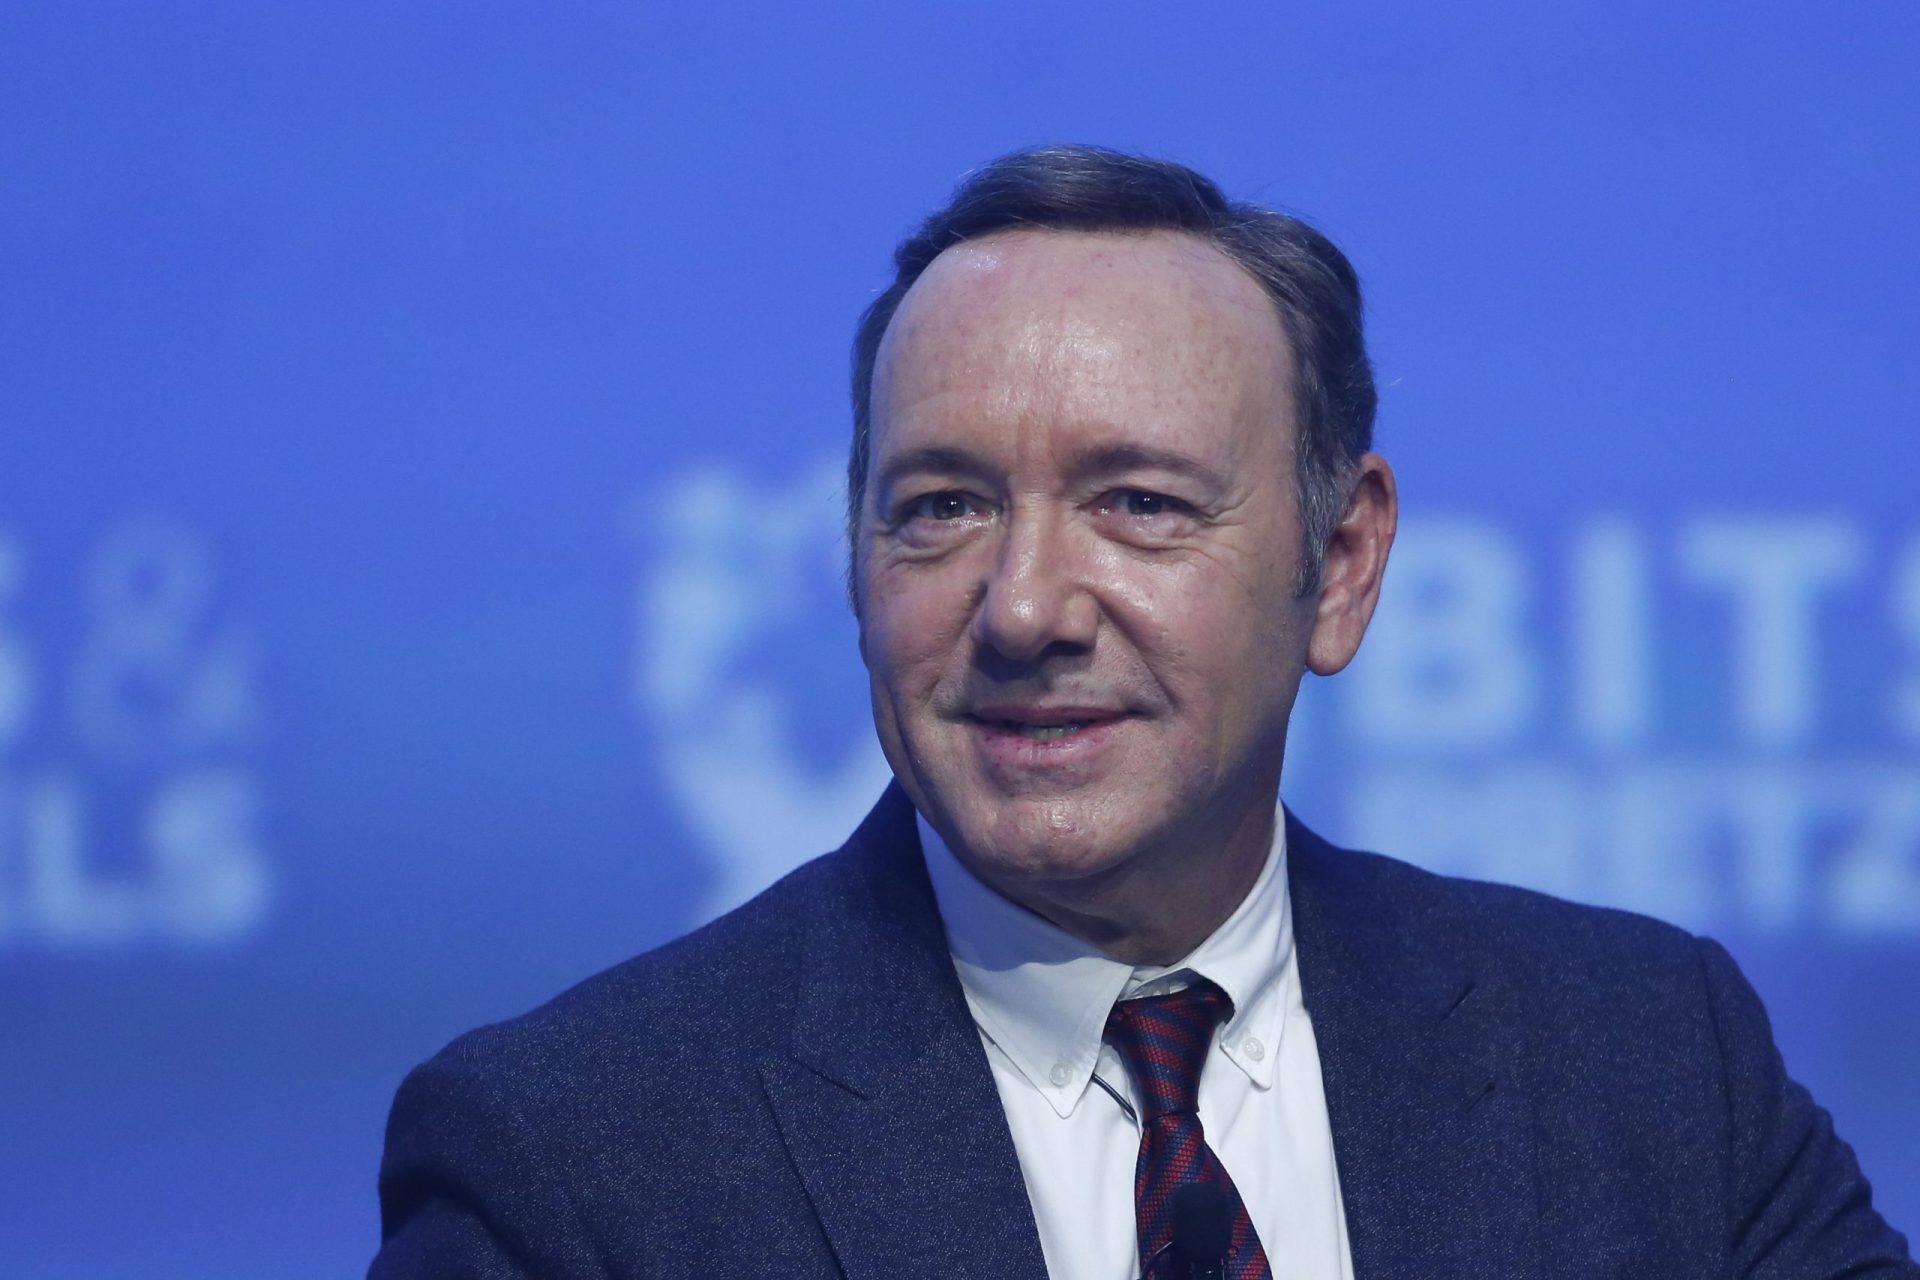 Kevin Spacey assume que é homossexual